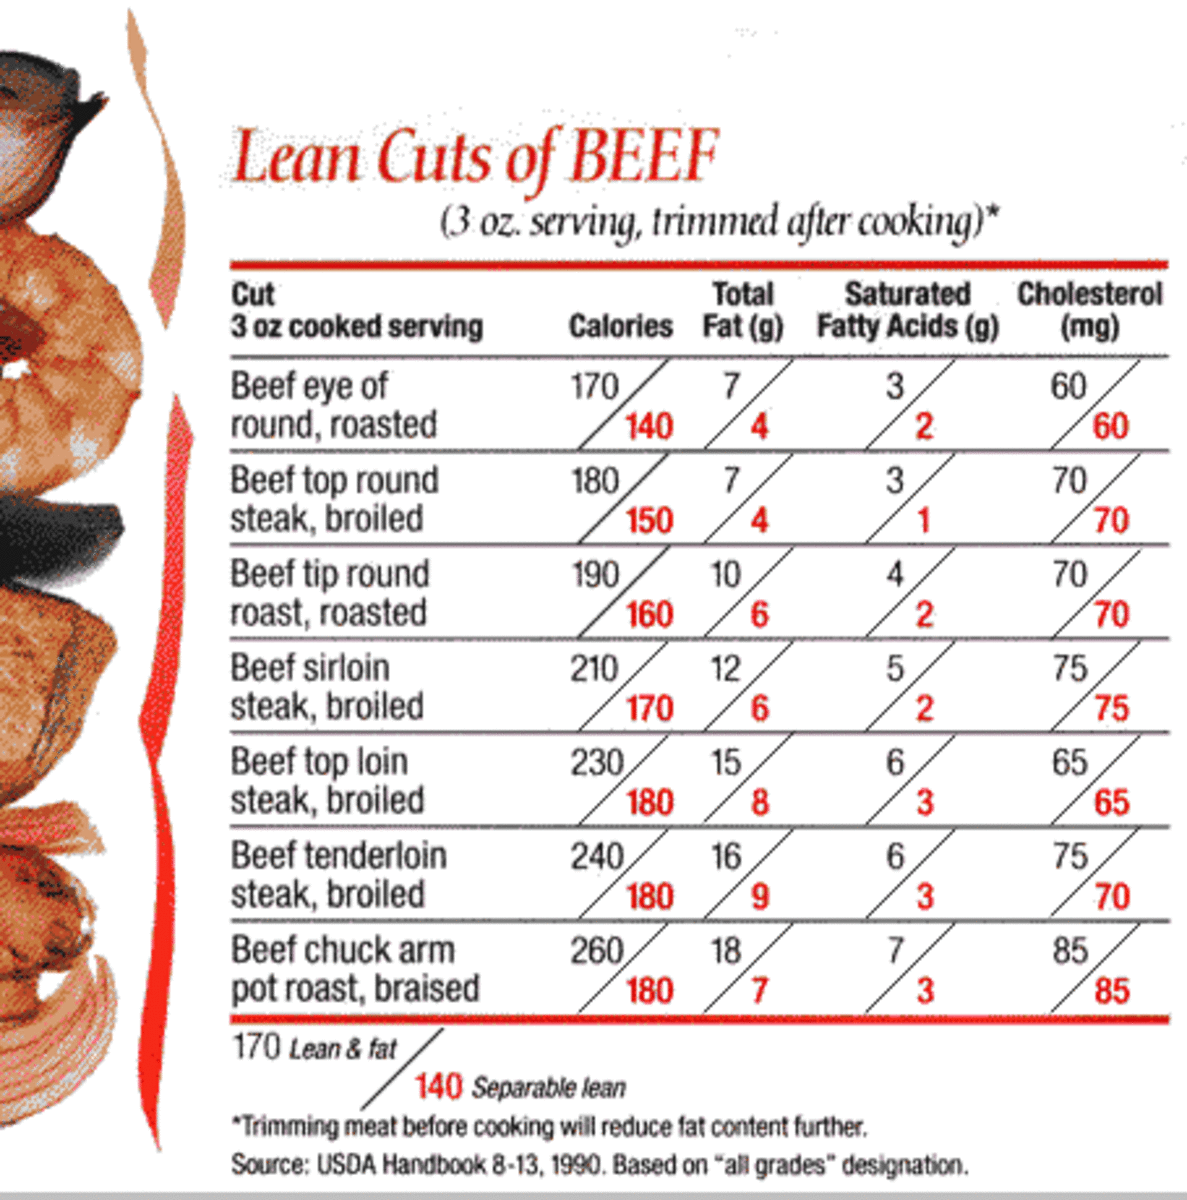 Calories of Lean Cuts of Beef